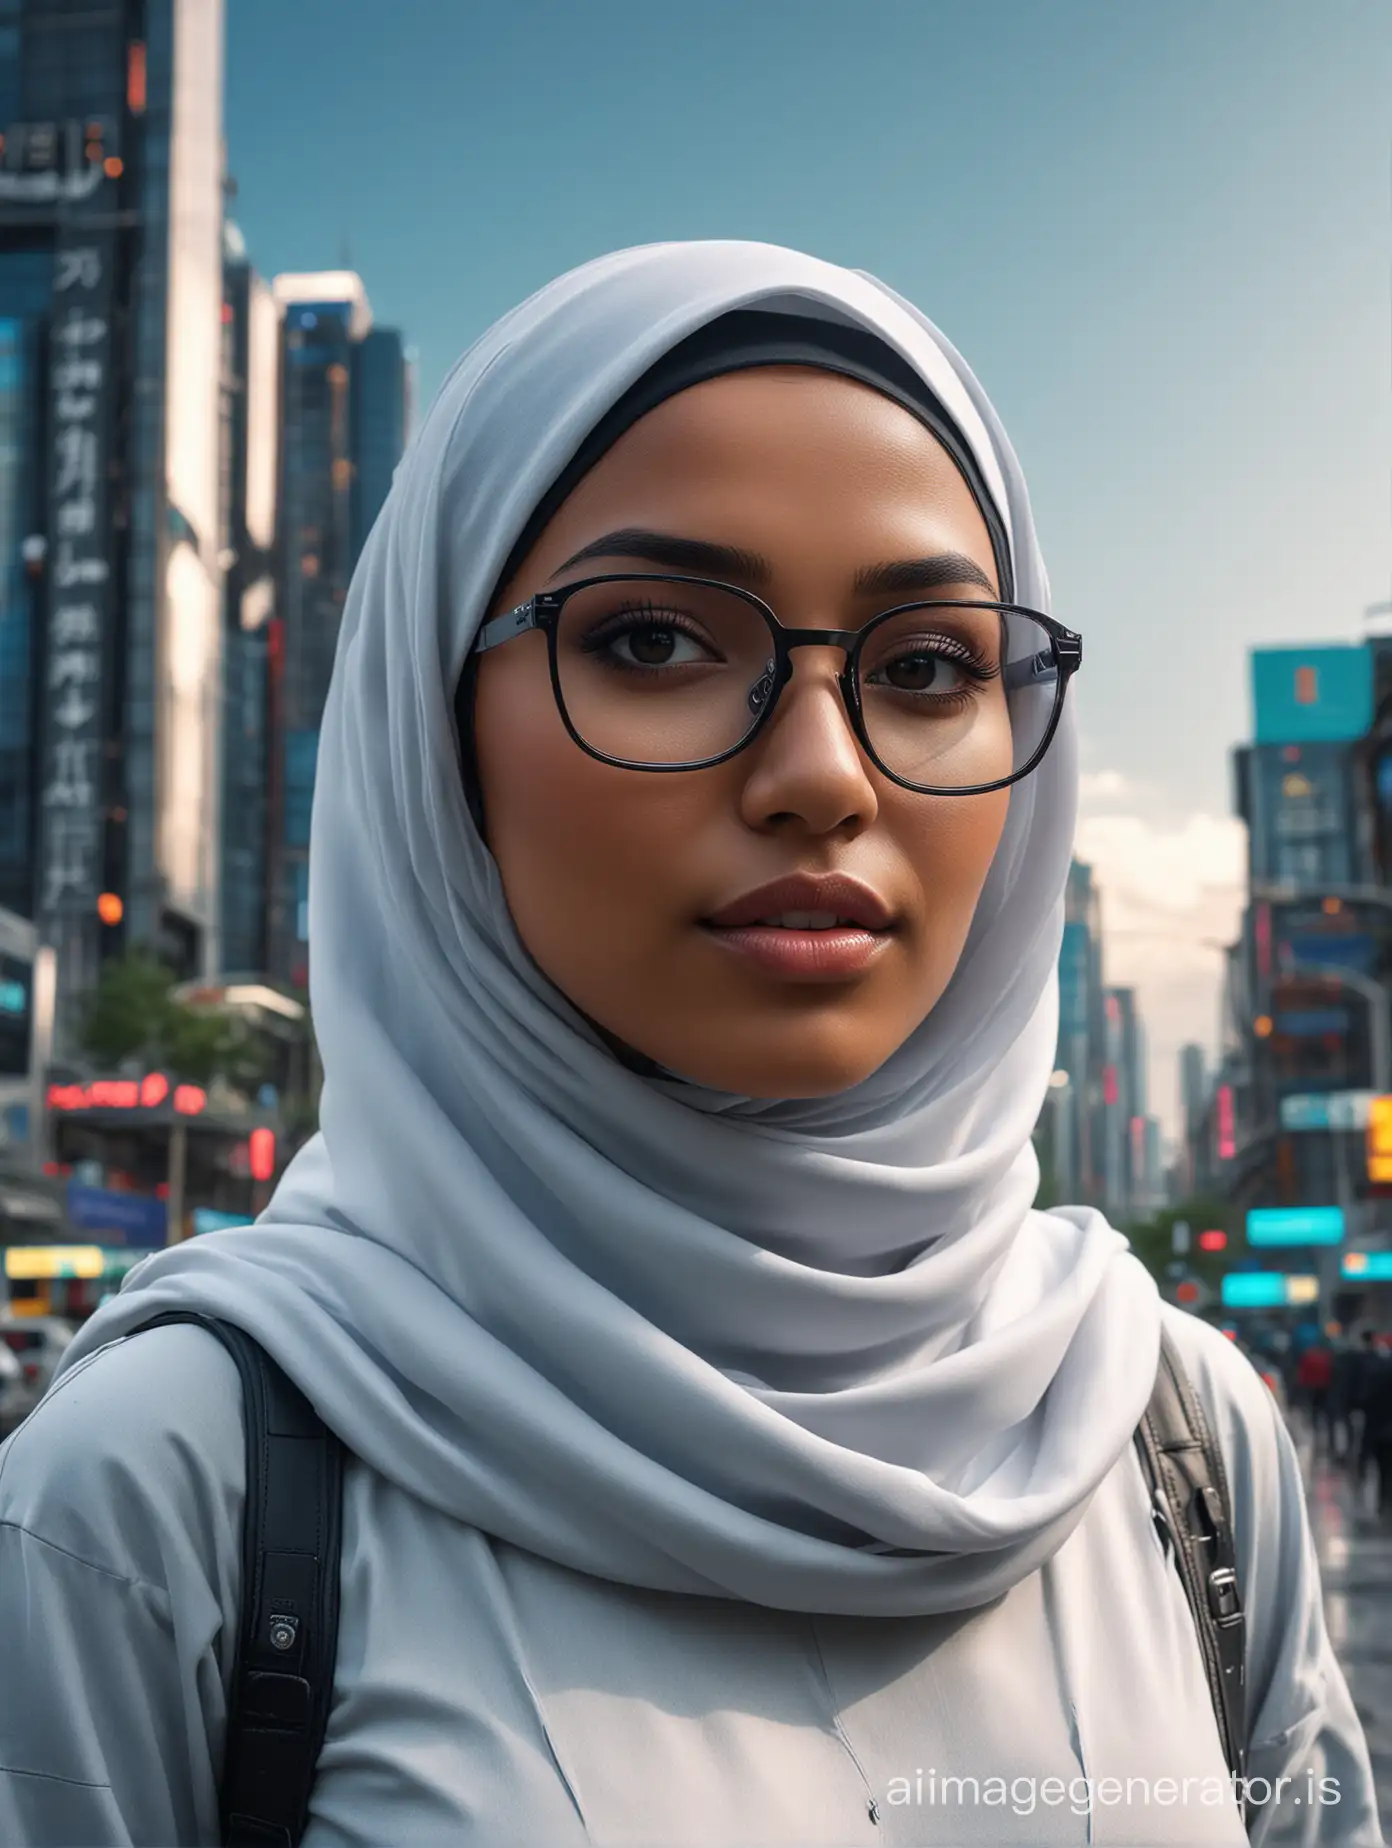 Stylish-Muslim-Woman-with-Clear-Glasses-and-Hijab-in-Futuristic-Cyberpark